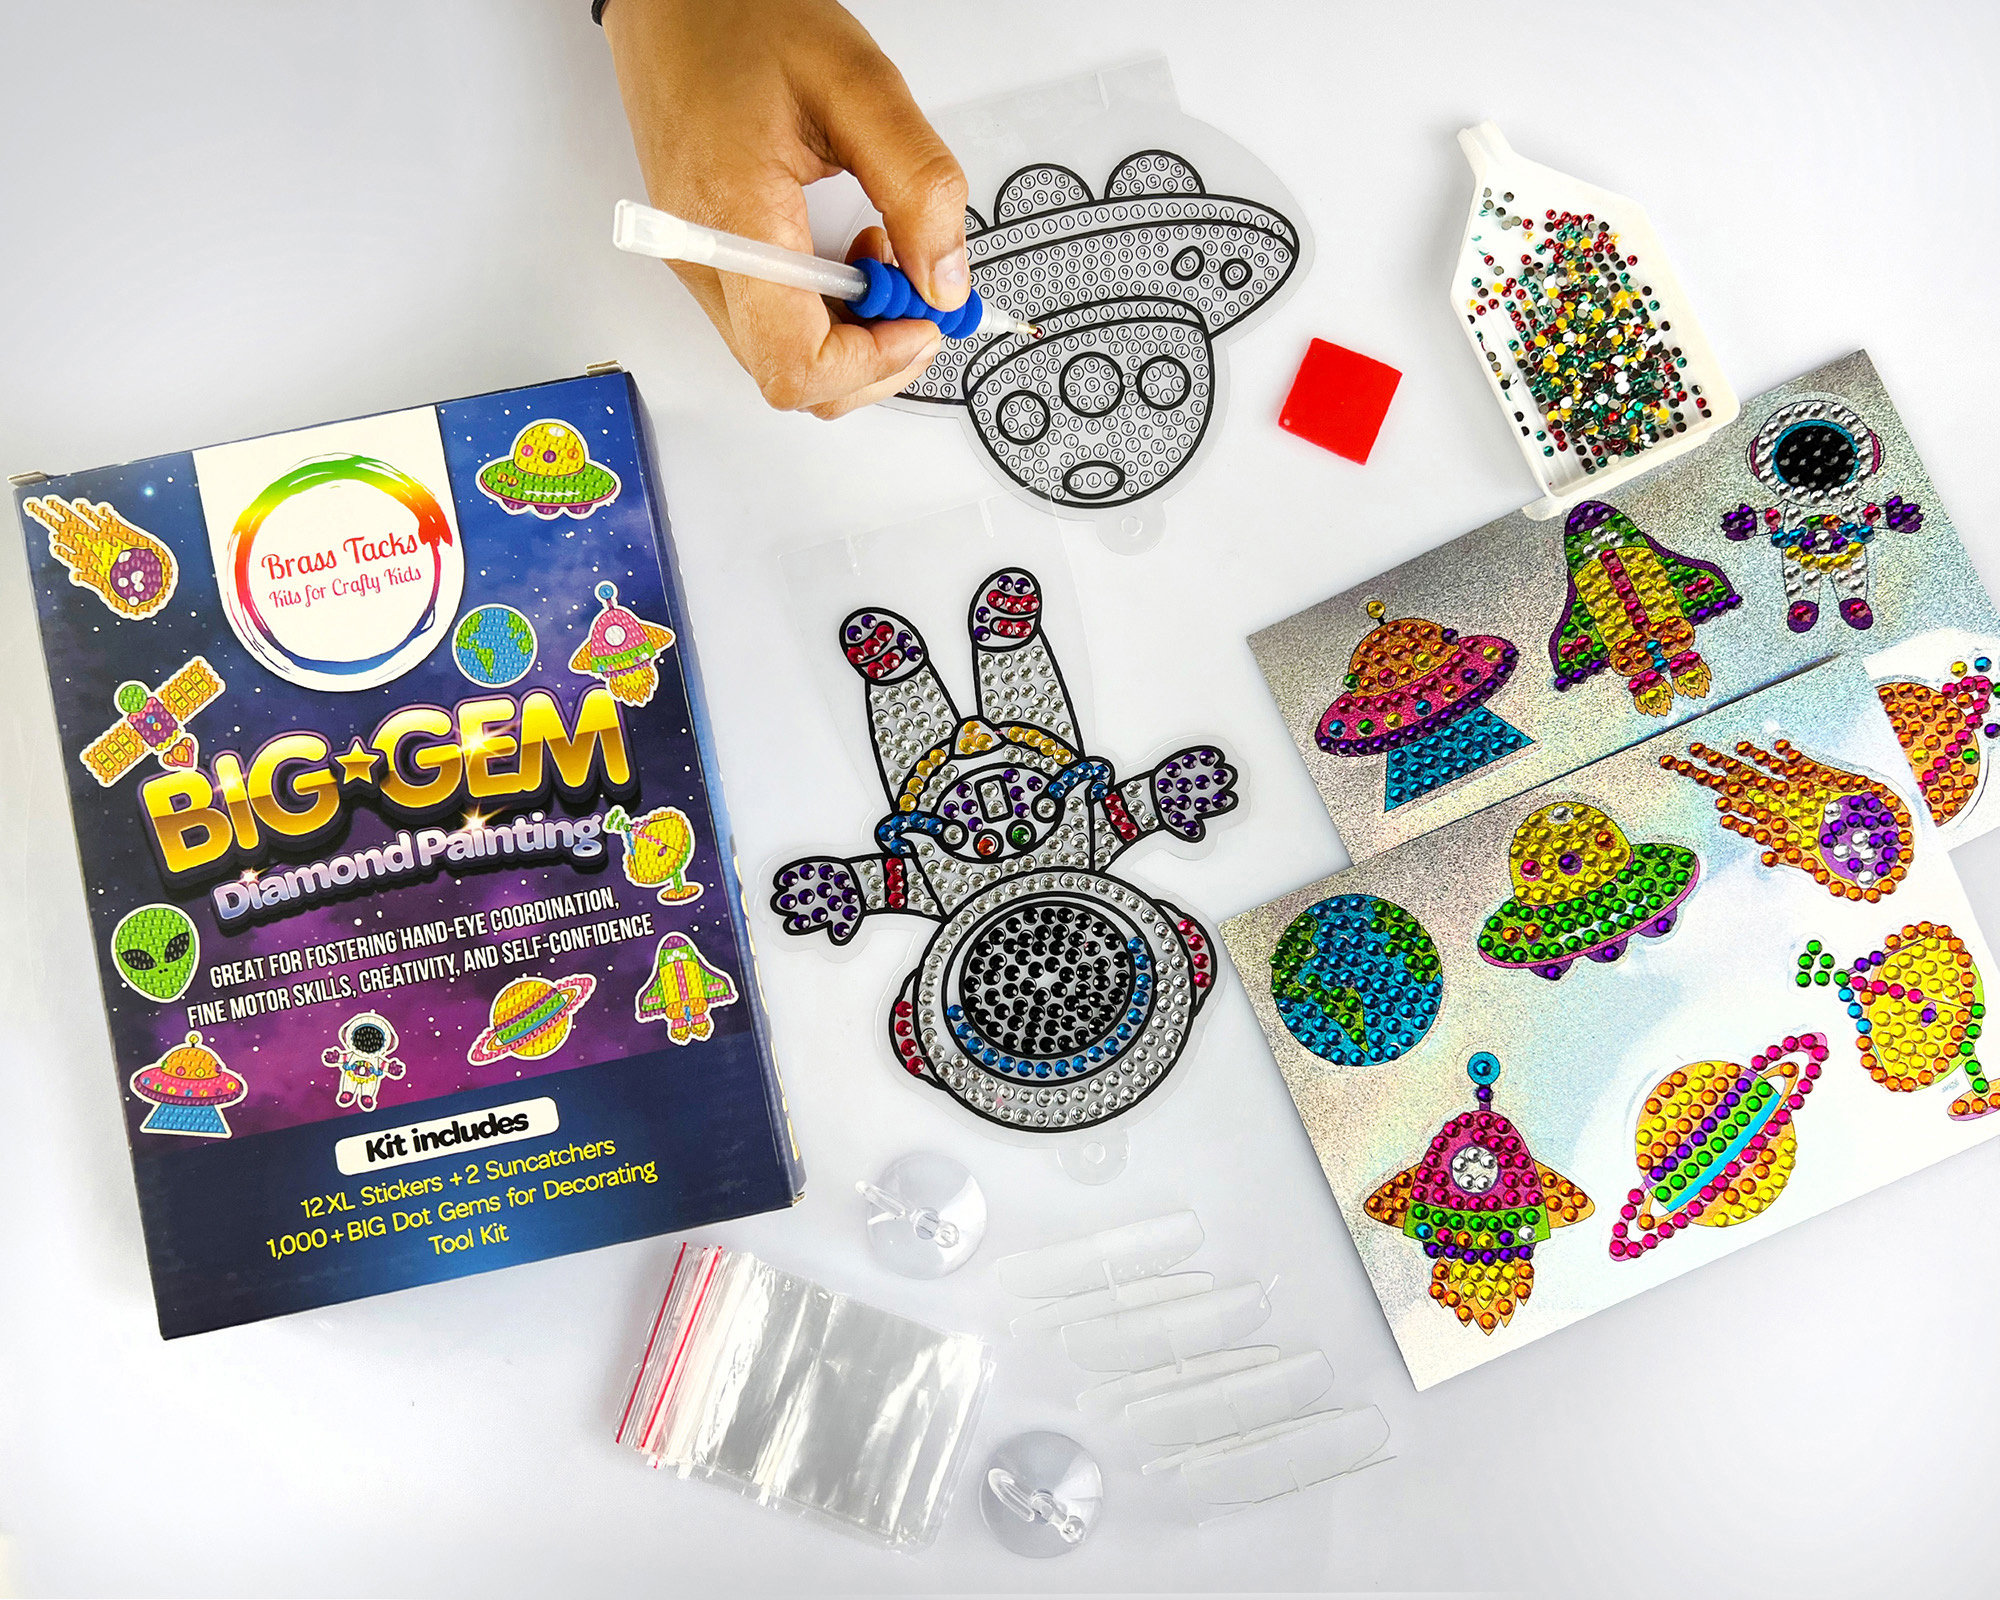 Big Gem Diamond Painting Craft Kit for Kids, Stickers and